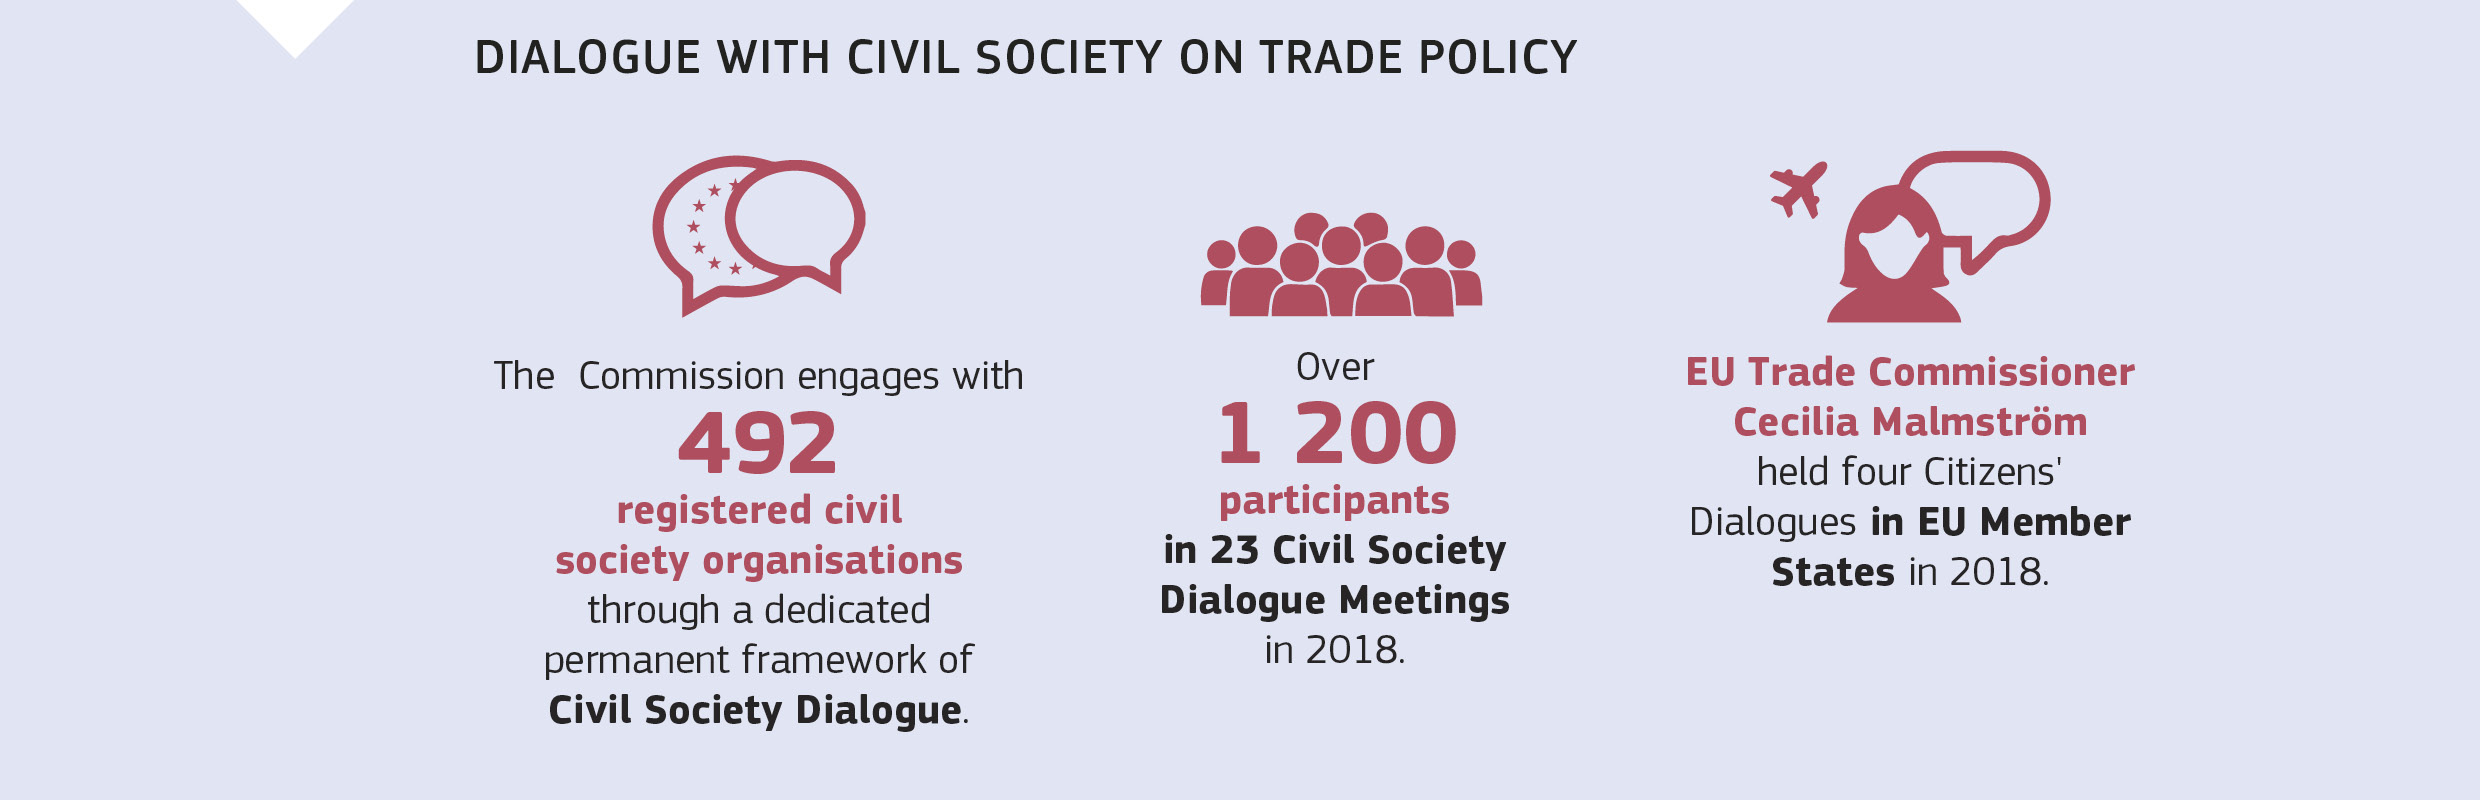 DIALOGUE WITH CIVIL SOCIETY ON TRADE POLICY